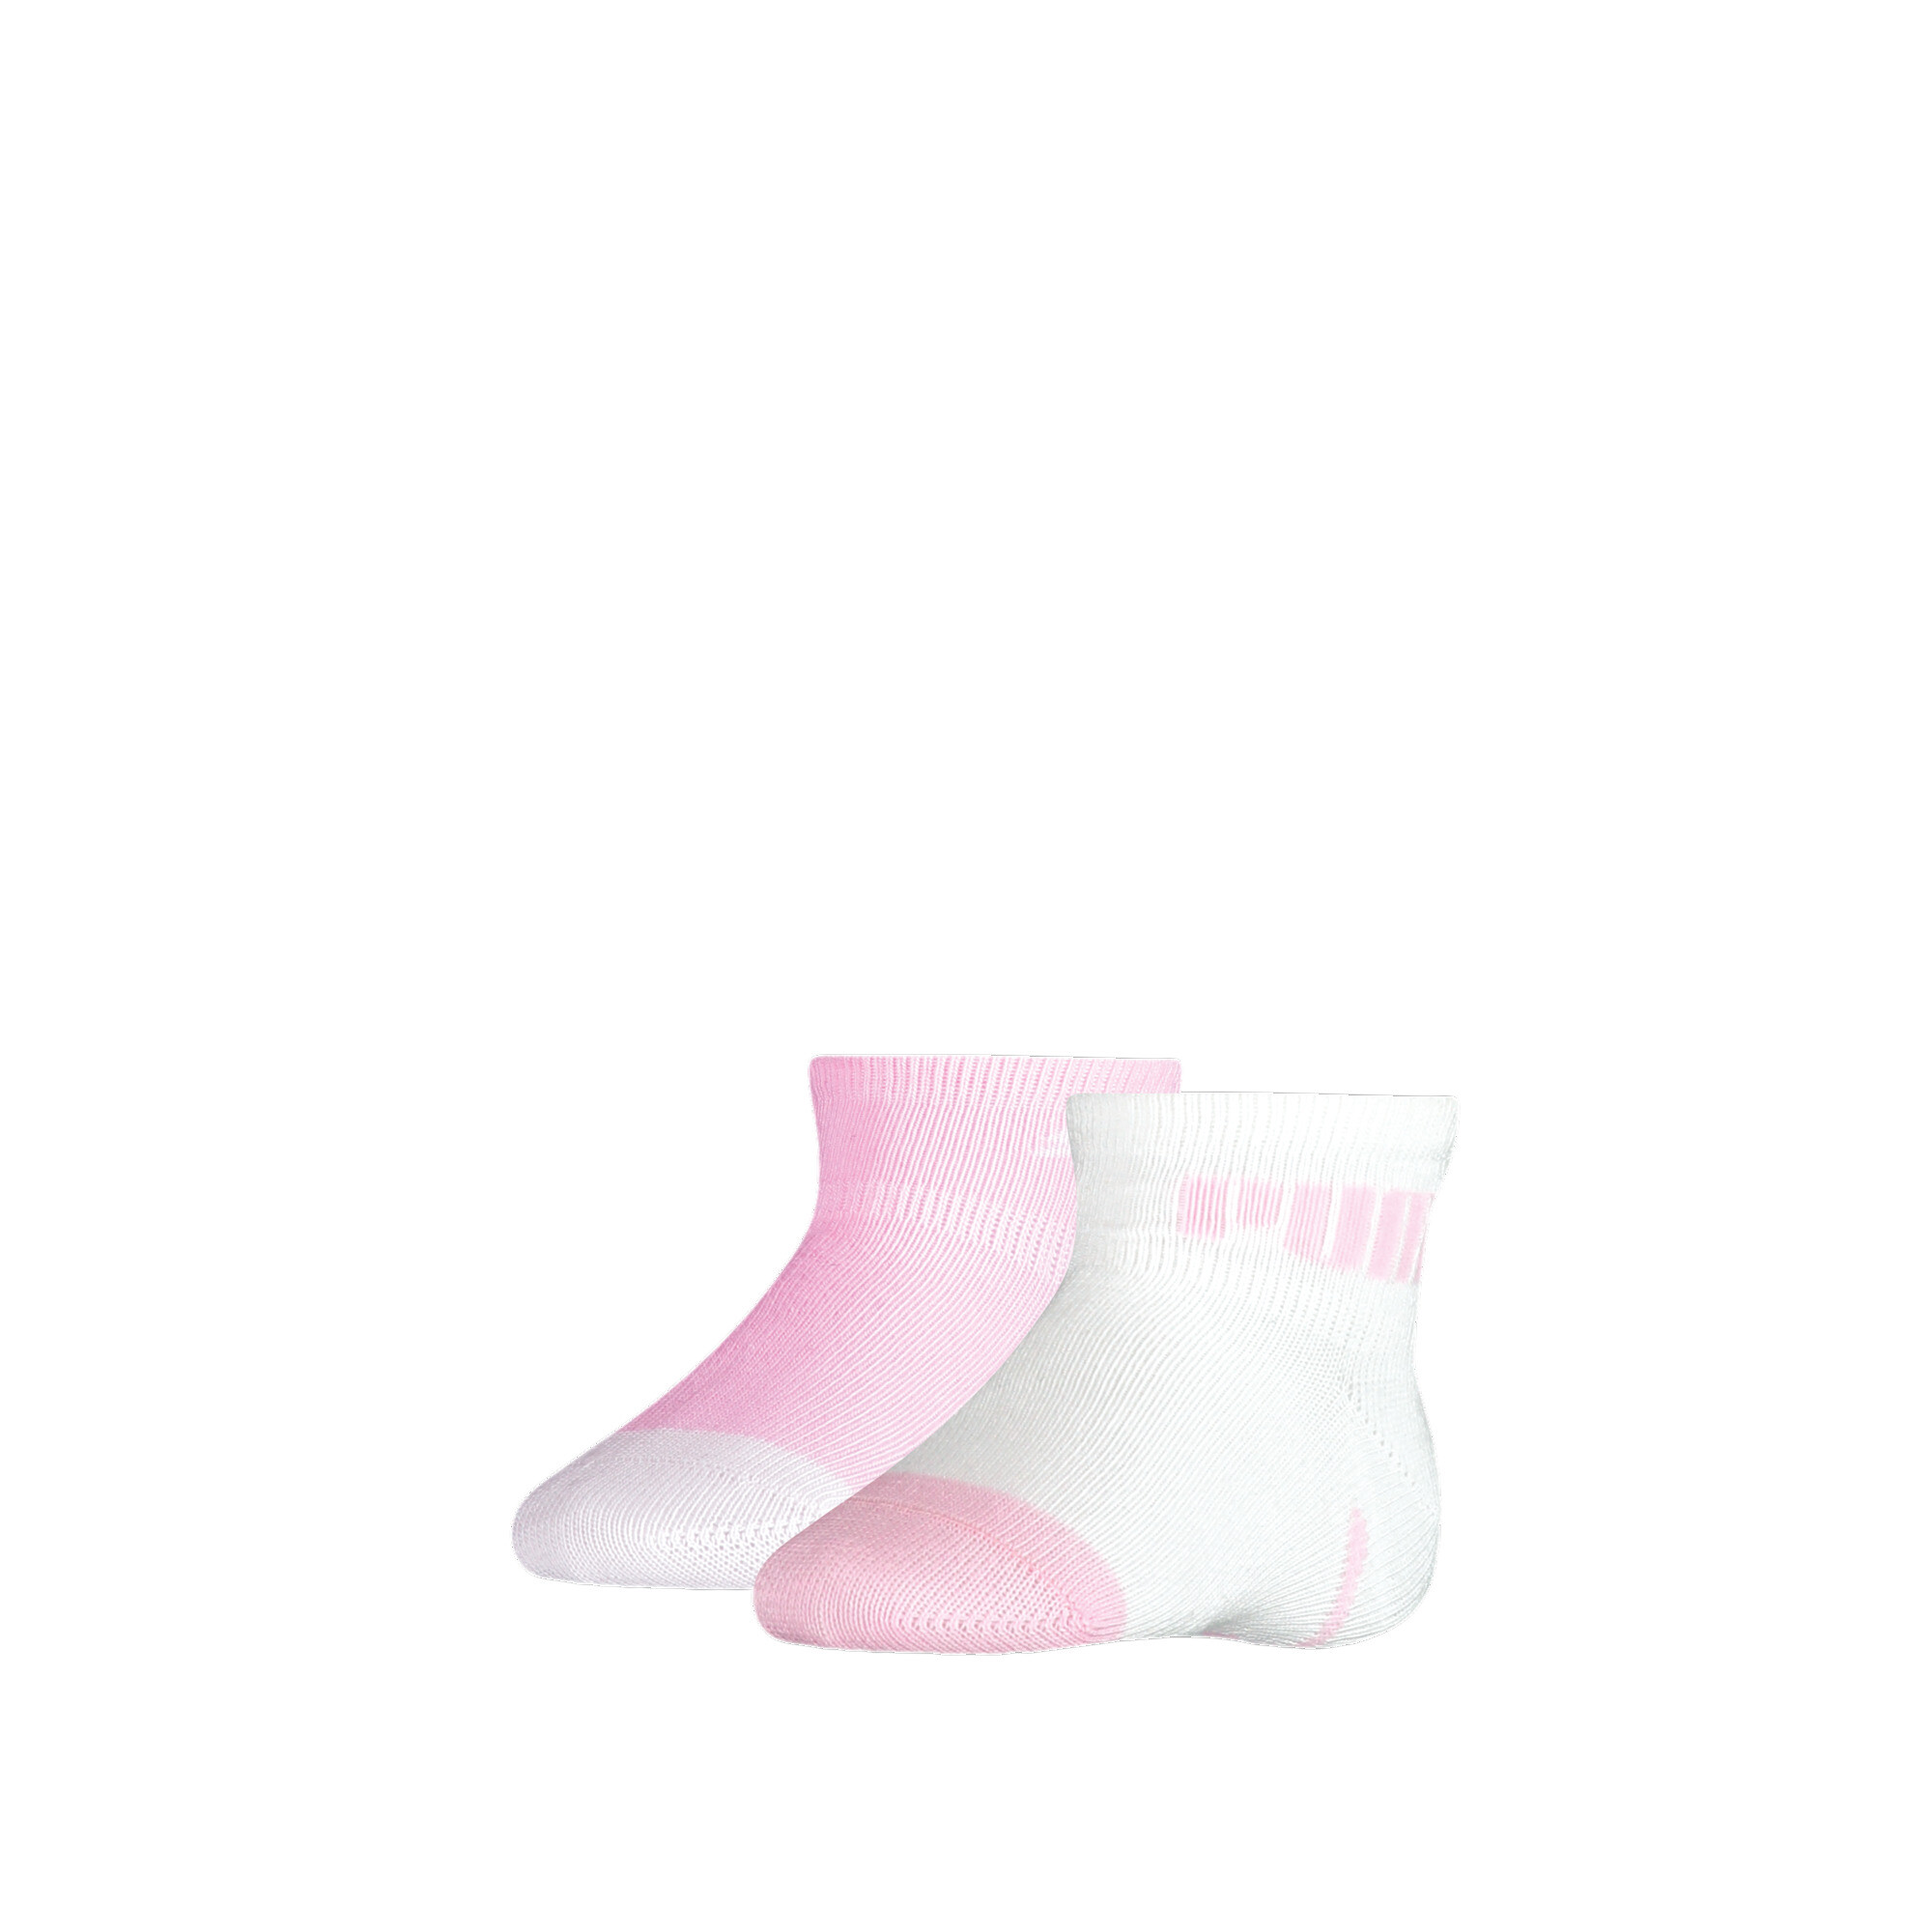 Kids' PUMA Baby Mini Cats Lifestyle Socks 2 Pack In Pink, Size 23-26